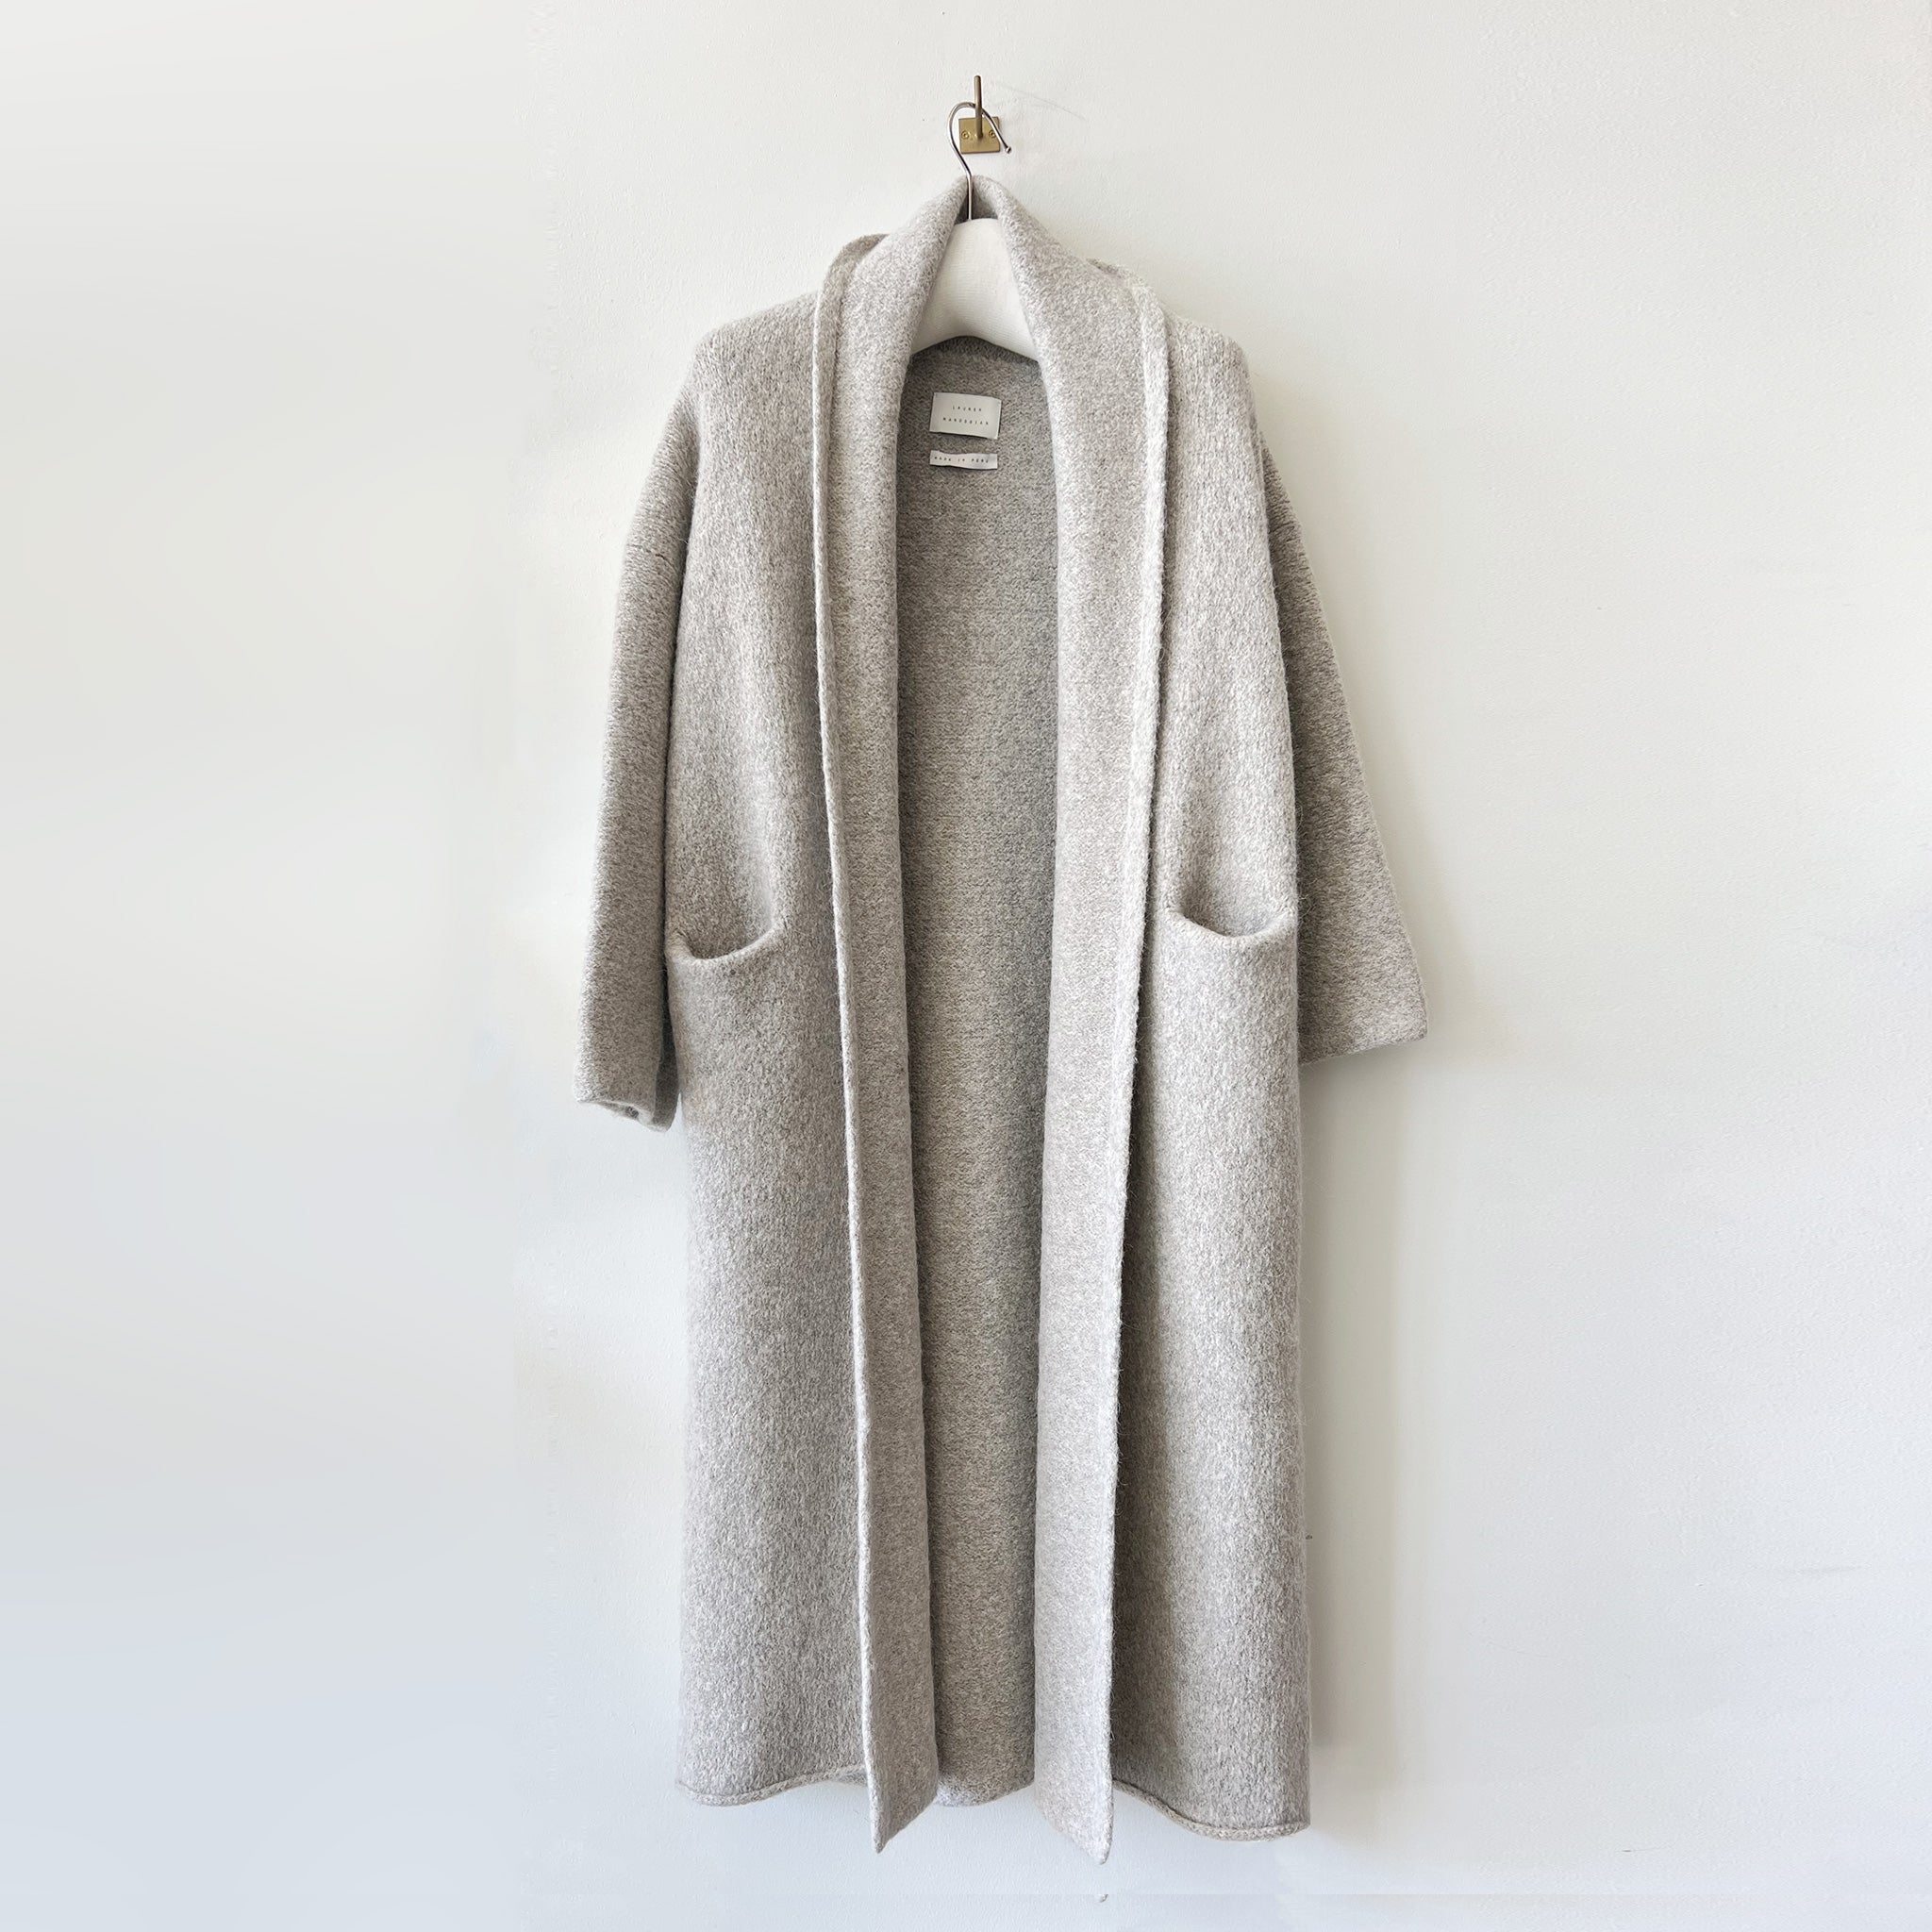 Long light grey cardigan-like coat with a shawl collar and slitted front pockets.